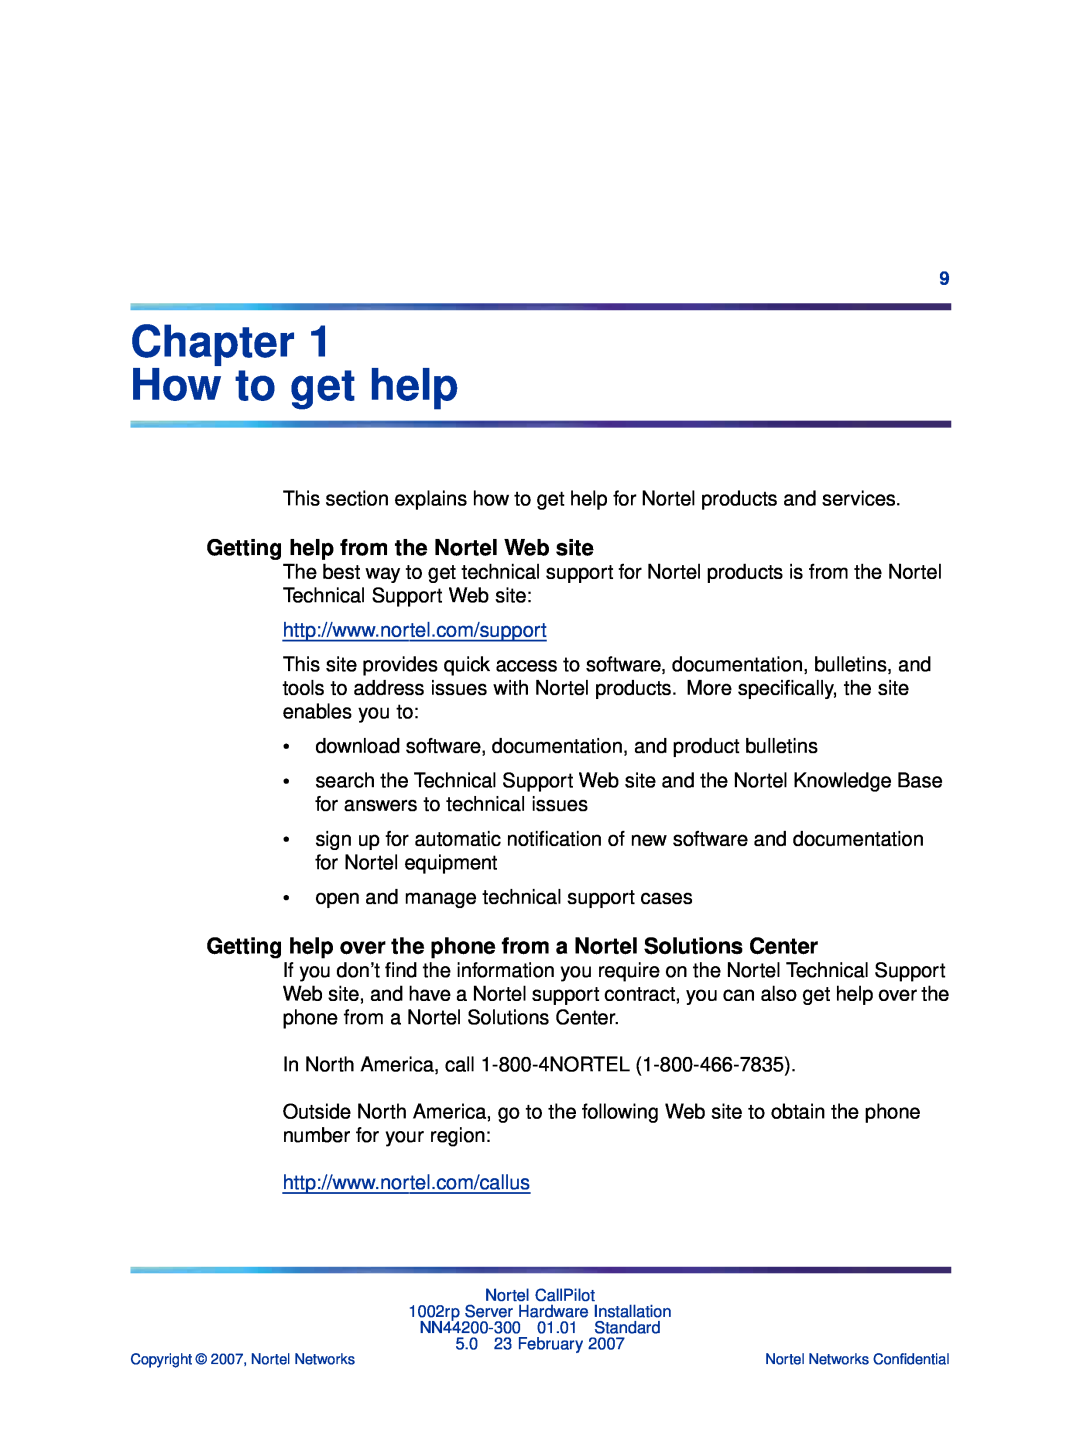 Nortel Networks NN44200-300 manual Chapter How to get help, Getting help from the Nortel Web site 